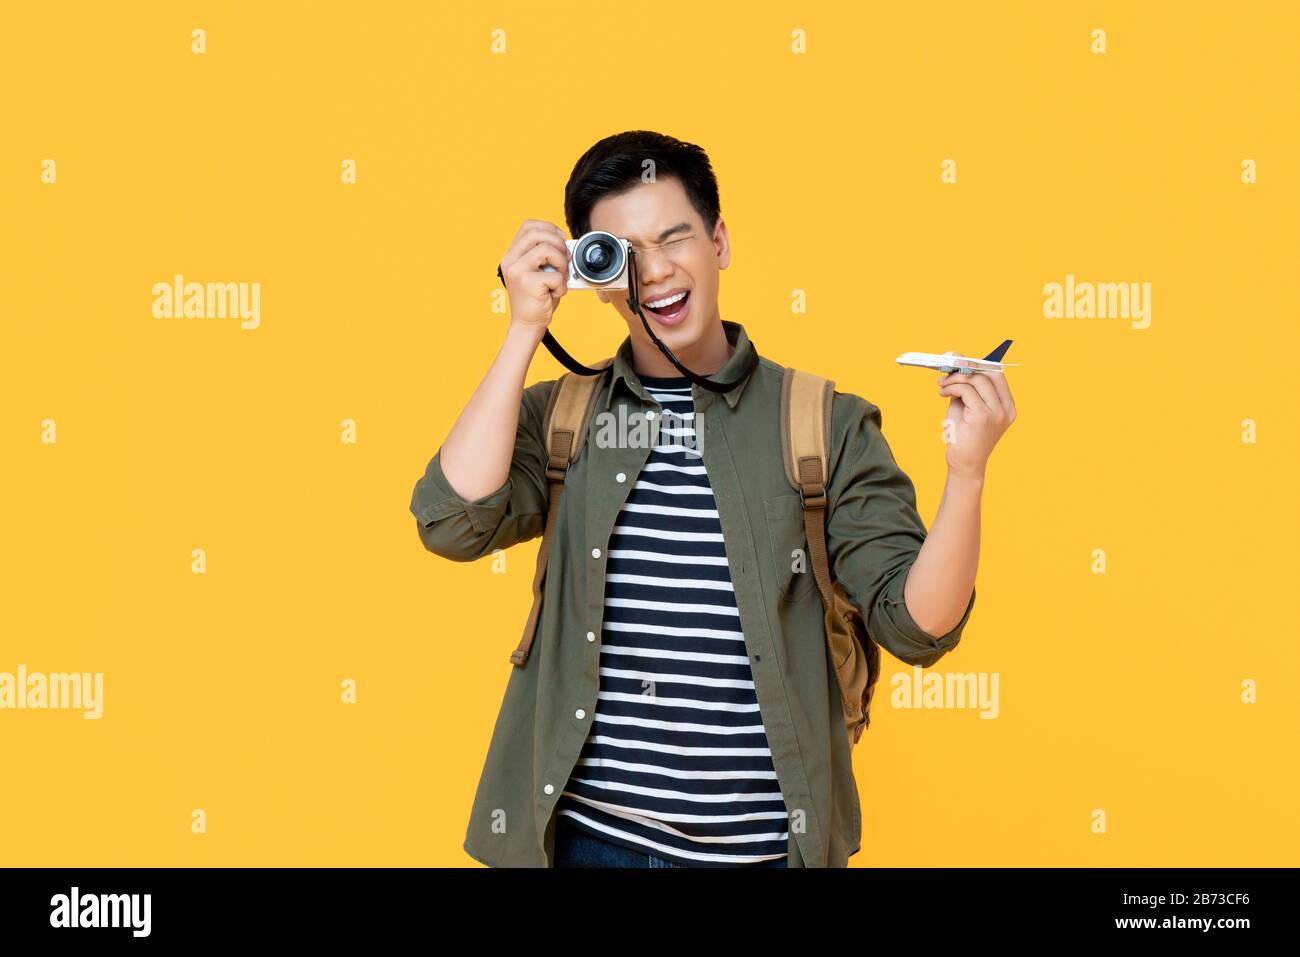 Young handsome smiling Asian tourist man holding plane model and camera isolated on yellow background Stock Photo